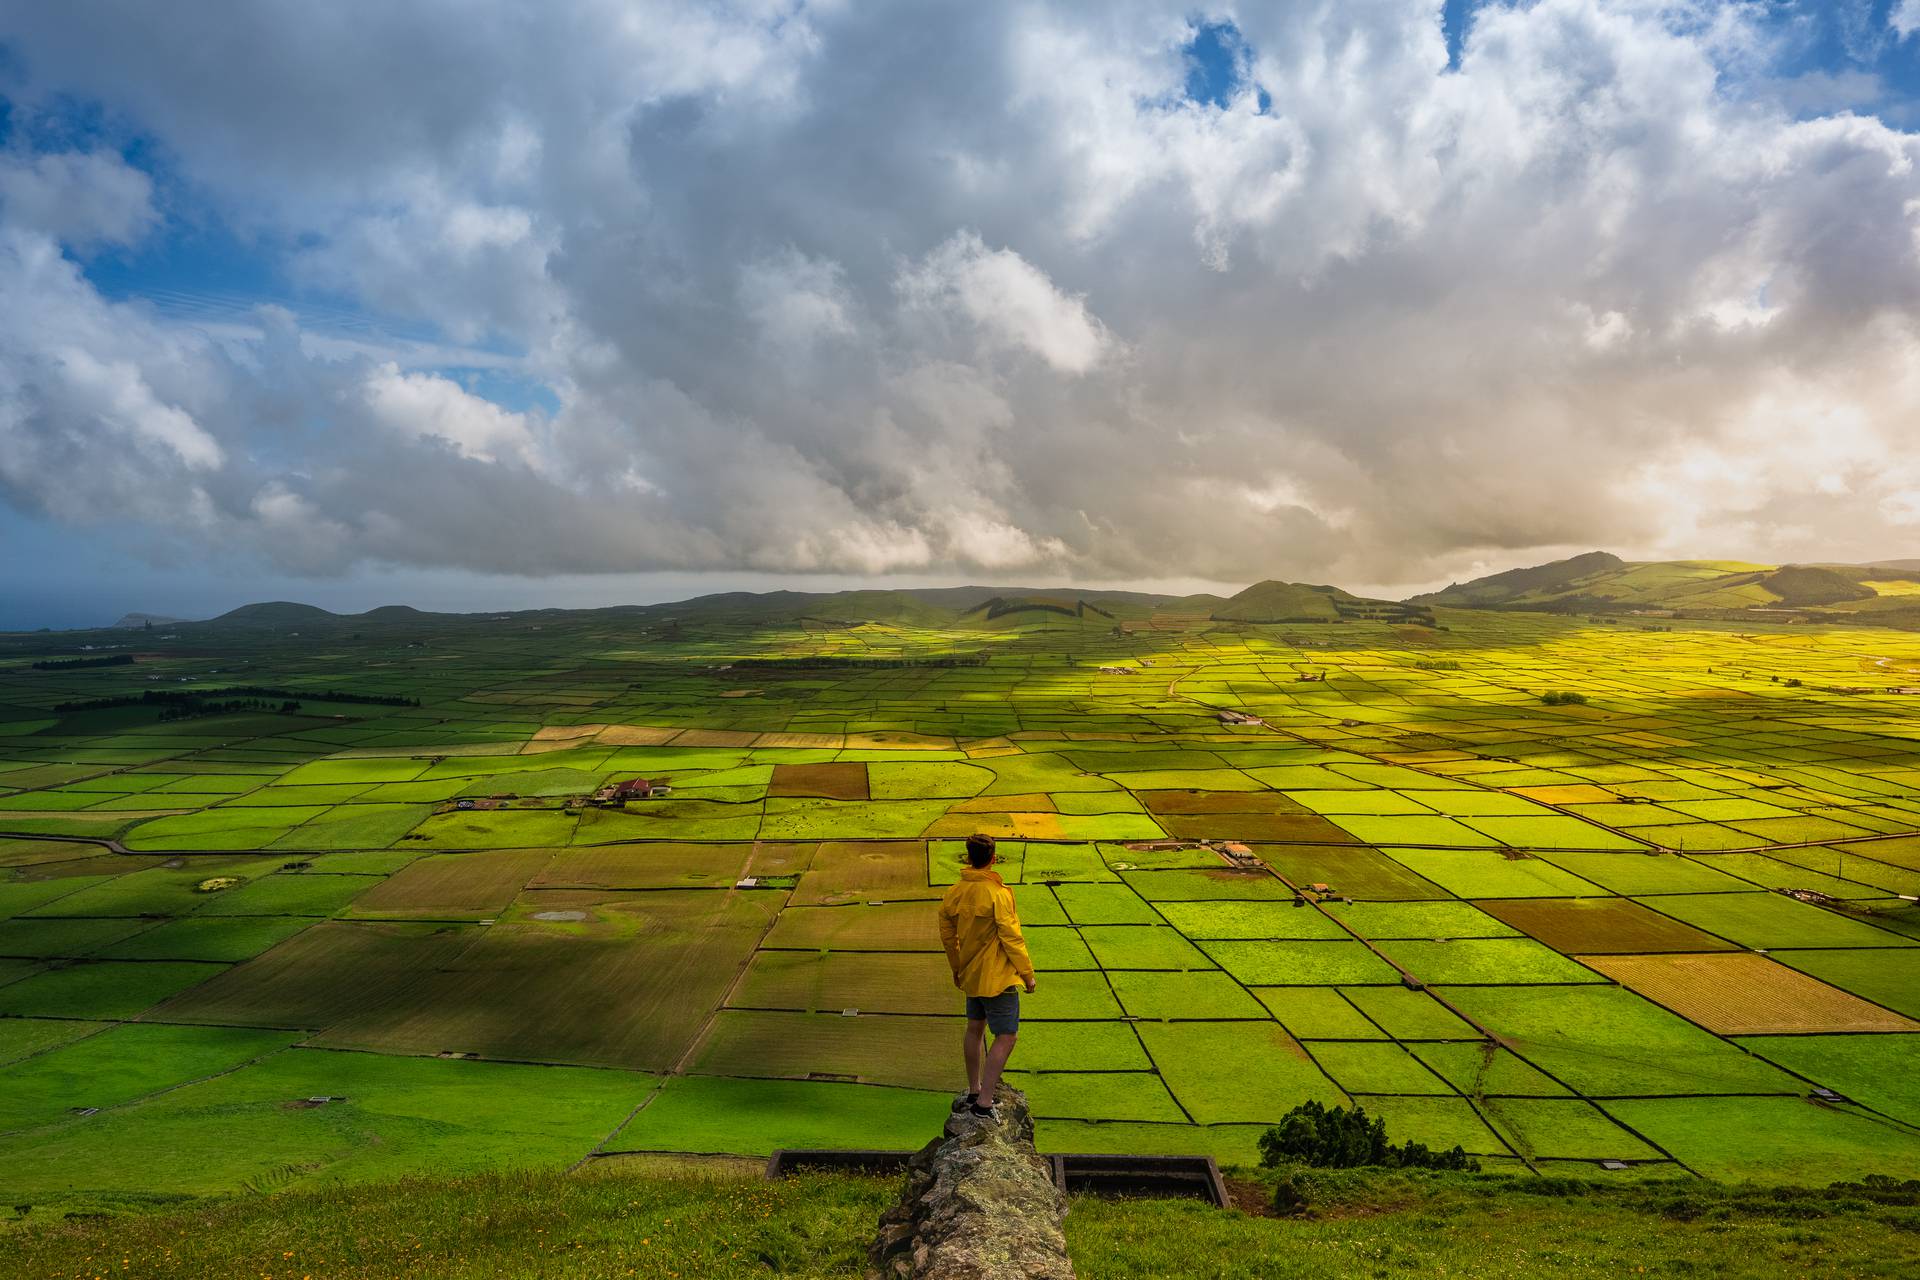 David Simpson looking over green fields in Terceira Island, The Azores. Is the Azores just Ireland in disguise